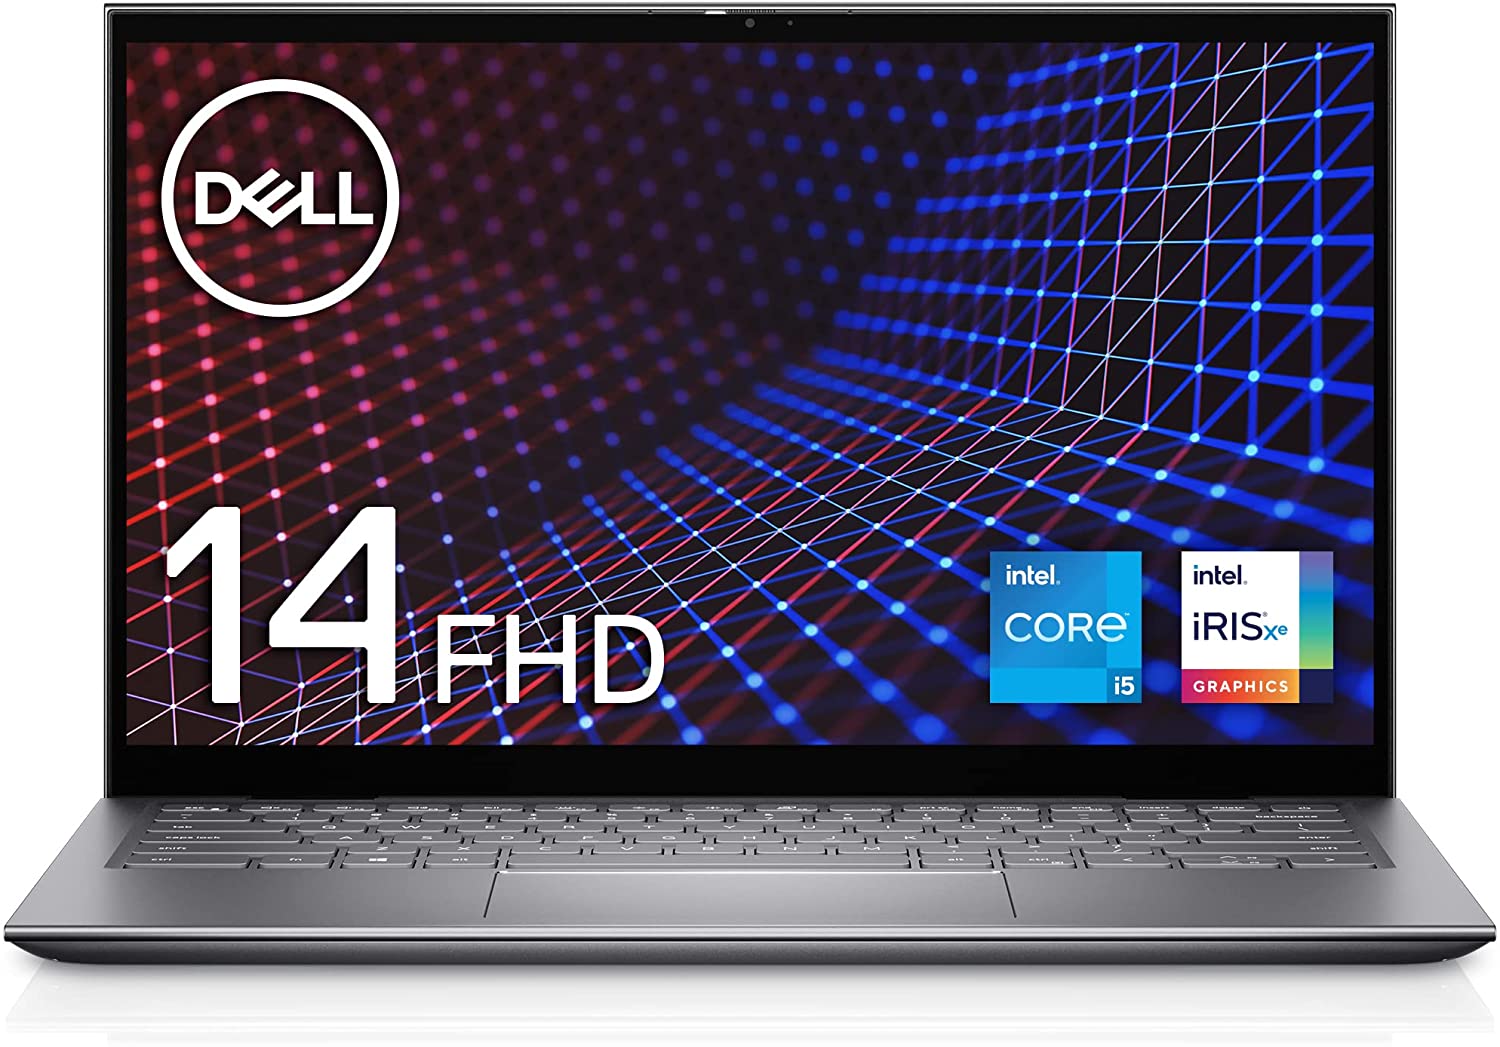 DELL（デル）：比較的低価格で購入しやすい